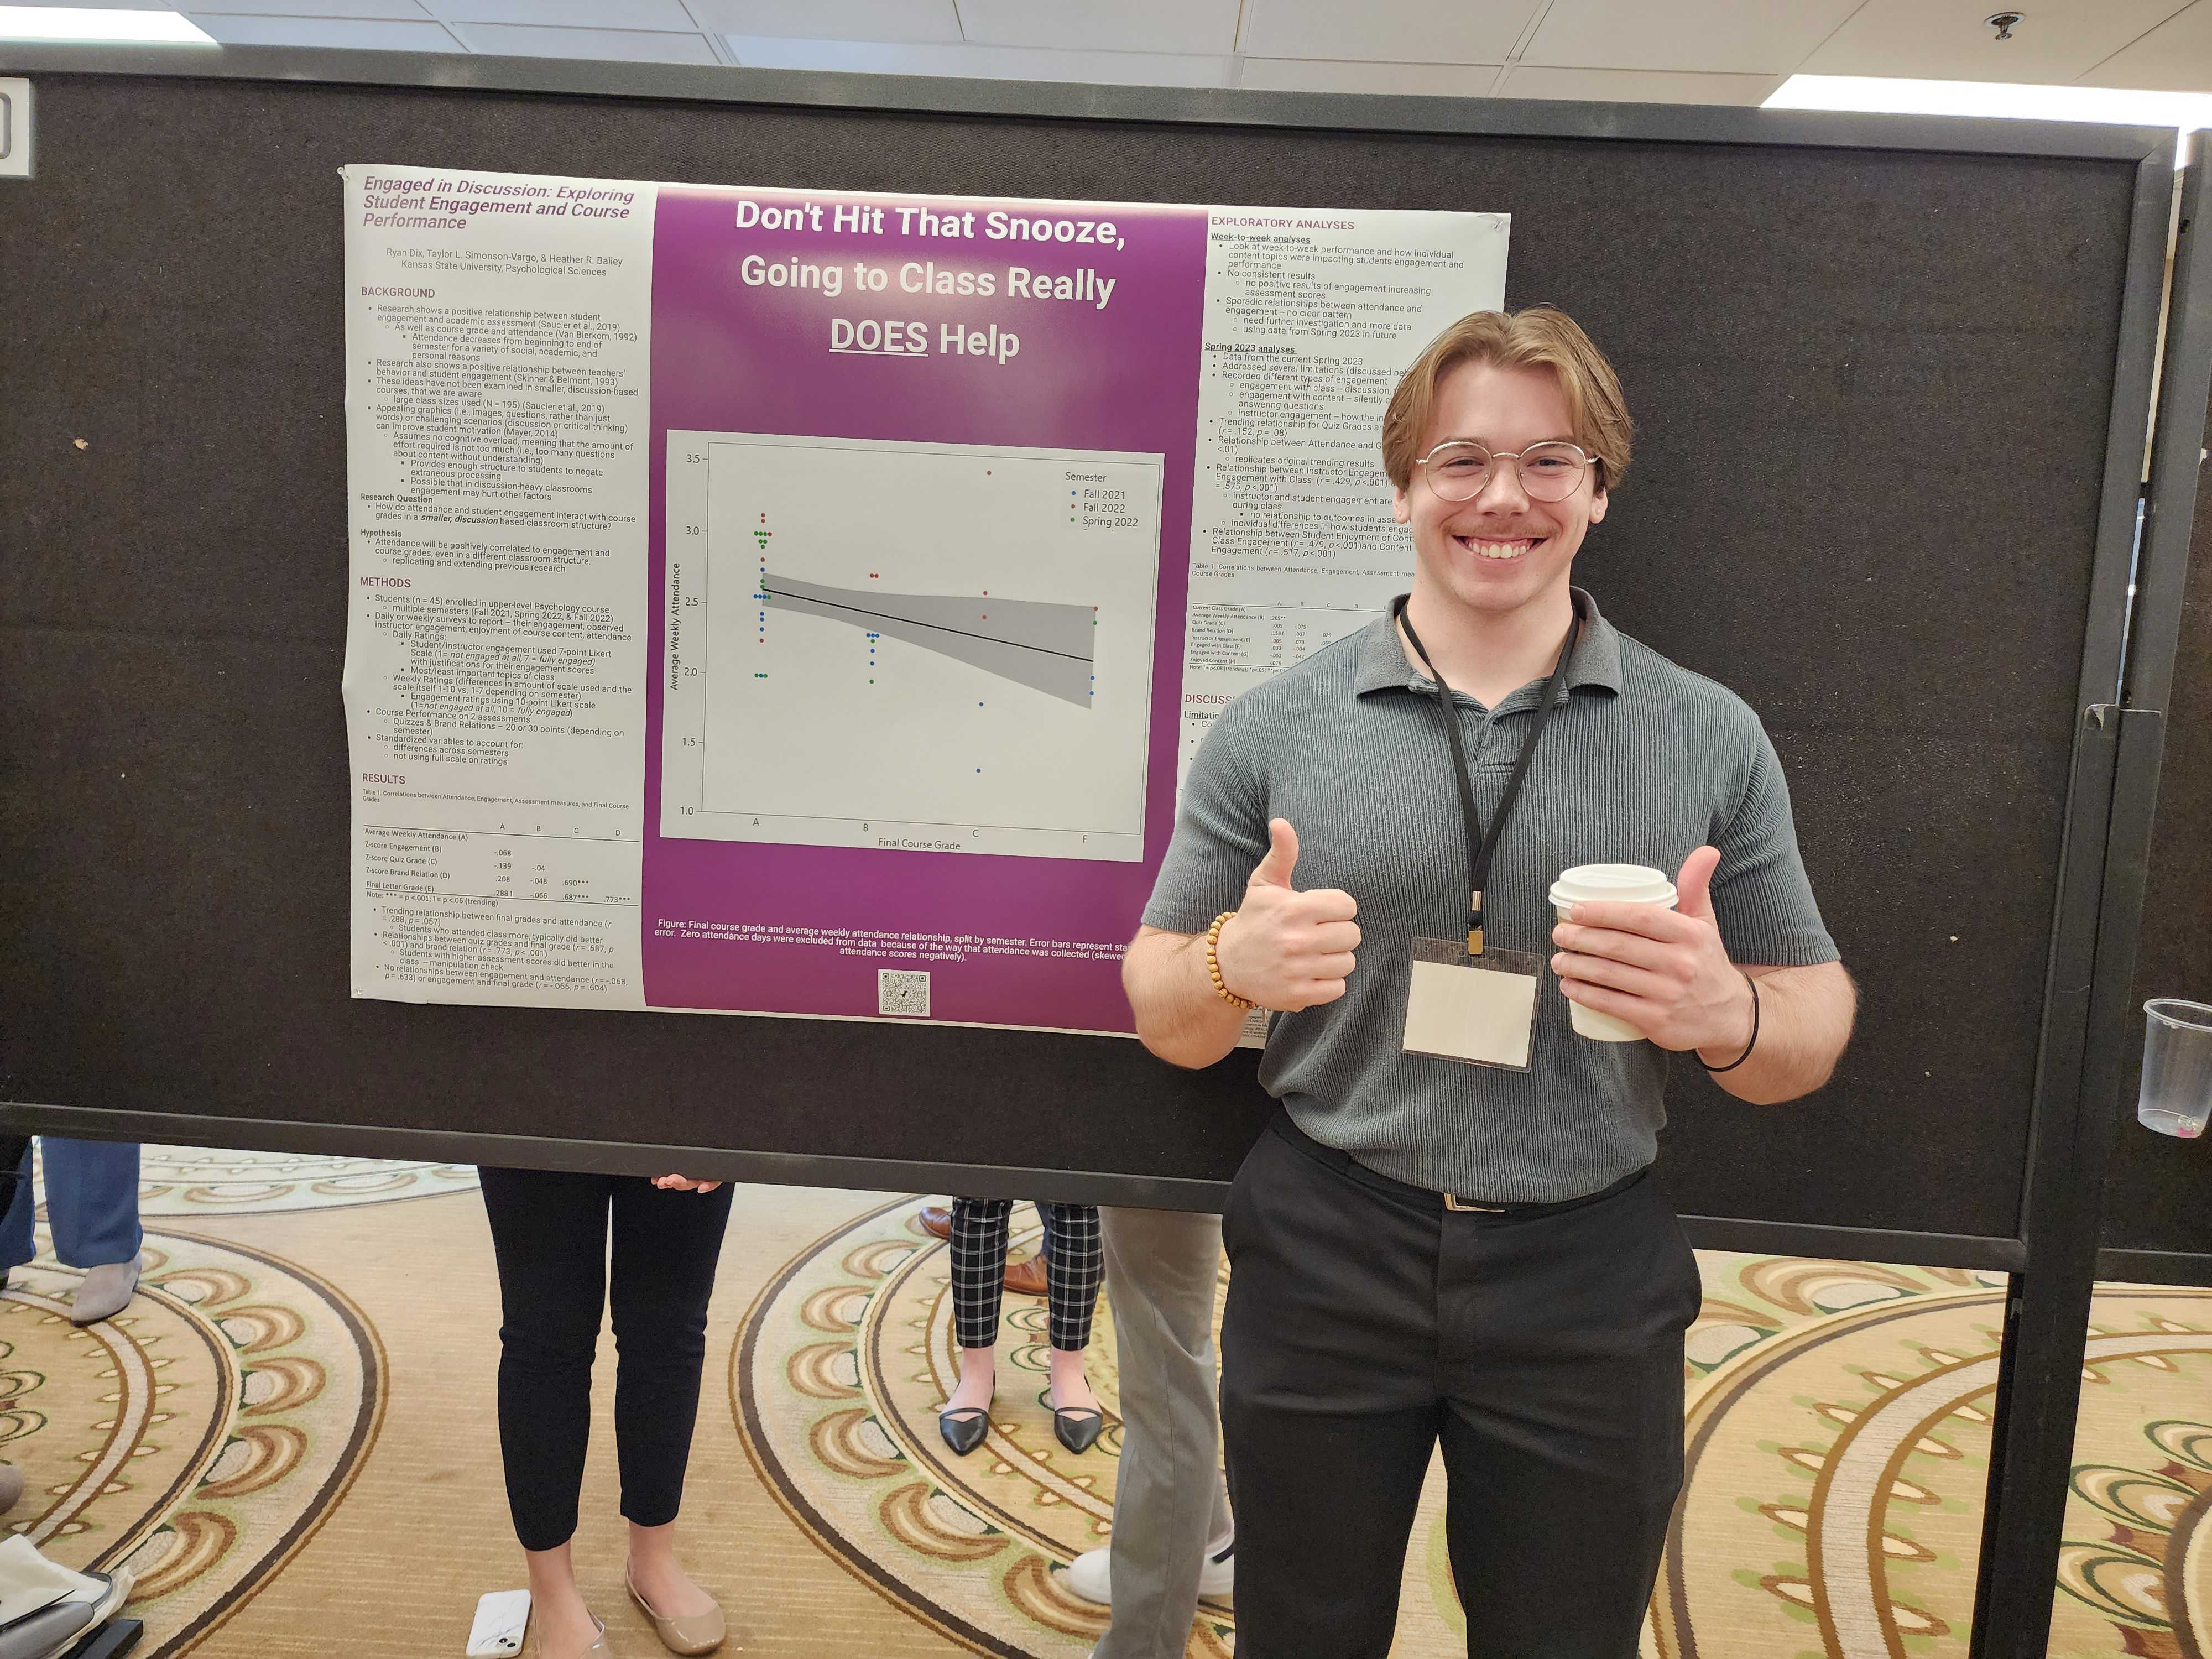 This is undergraduate, Ryan, presenting his poster titled "Don't Hit That Snooze, Going to Class Really DOES Help".